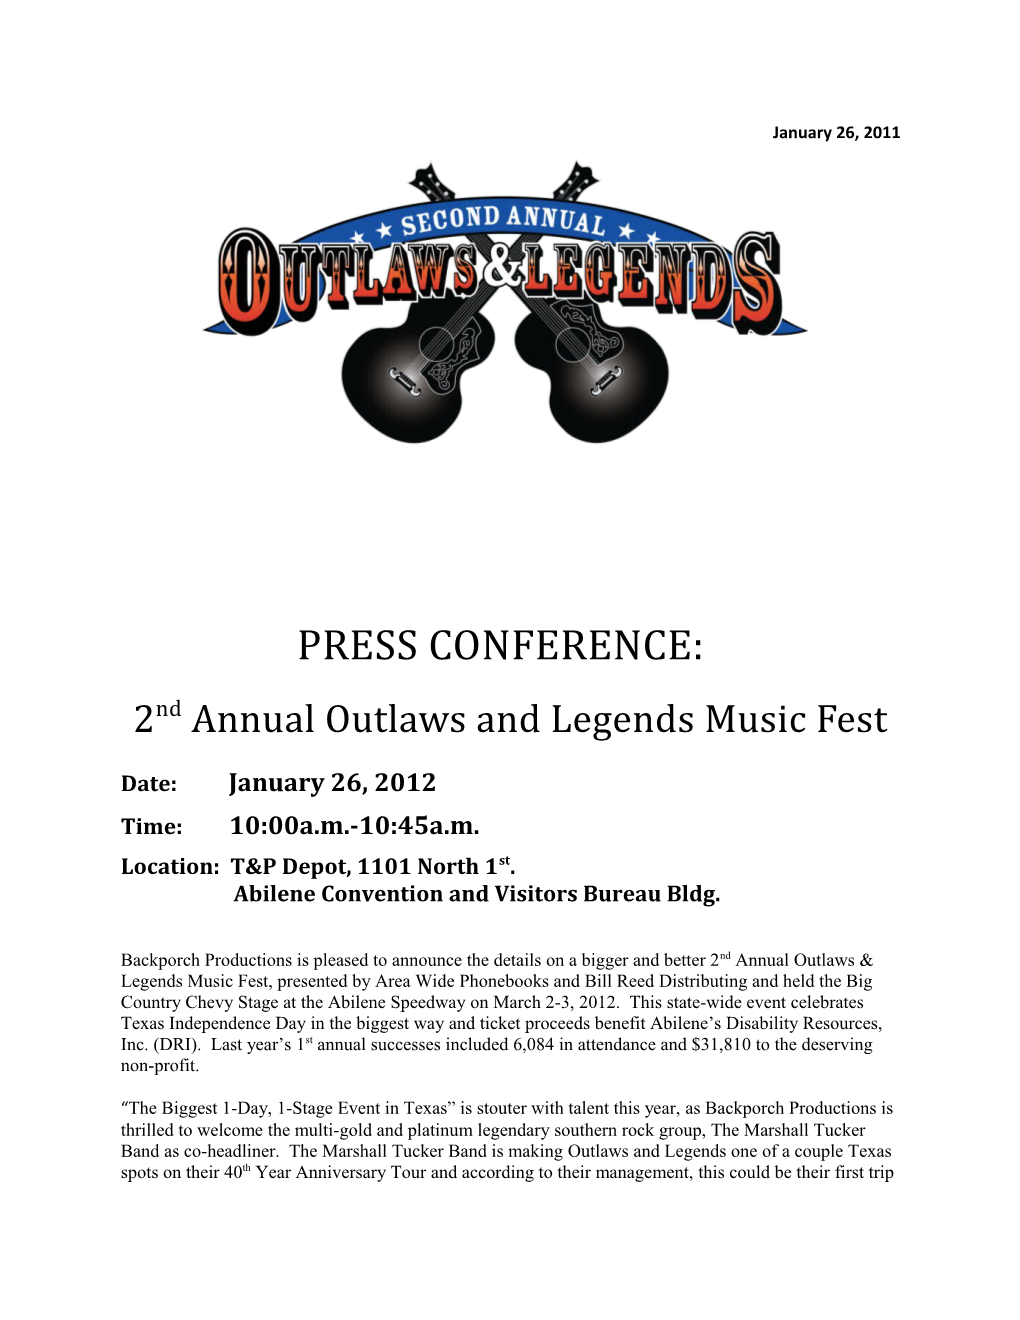 2Nd Annual Outlaws and Legends Music Fest